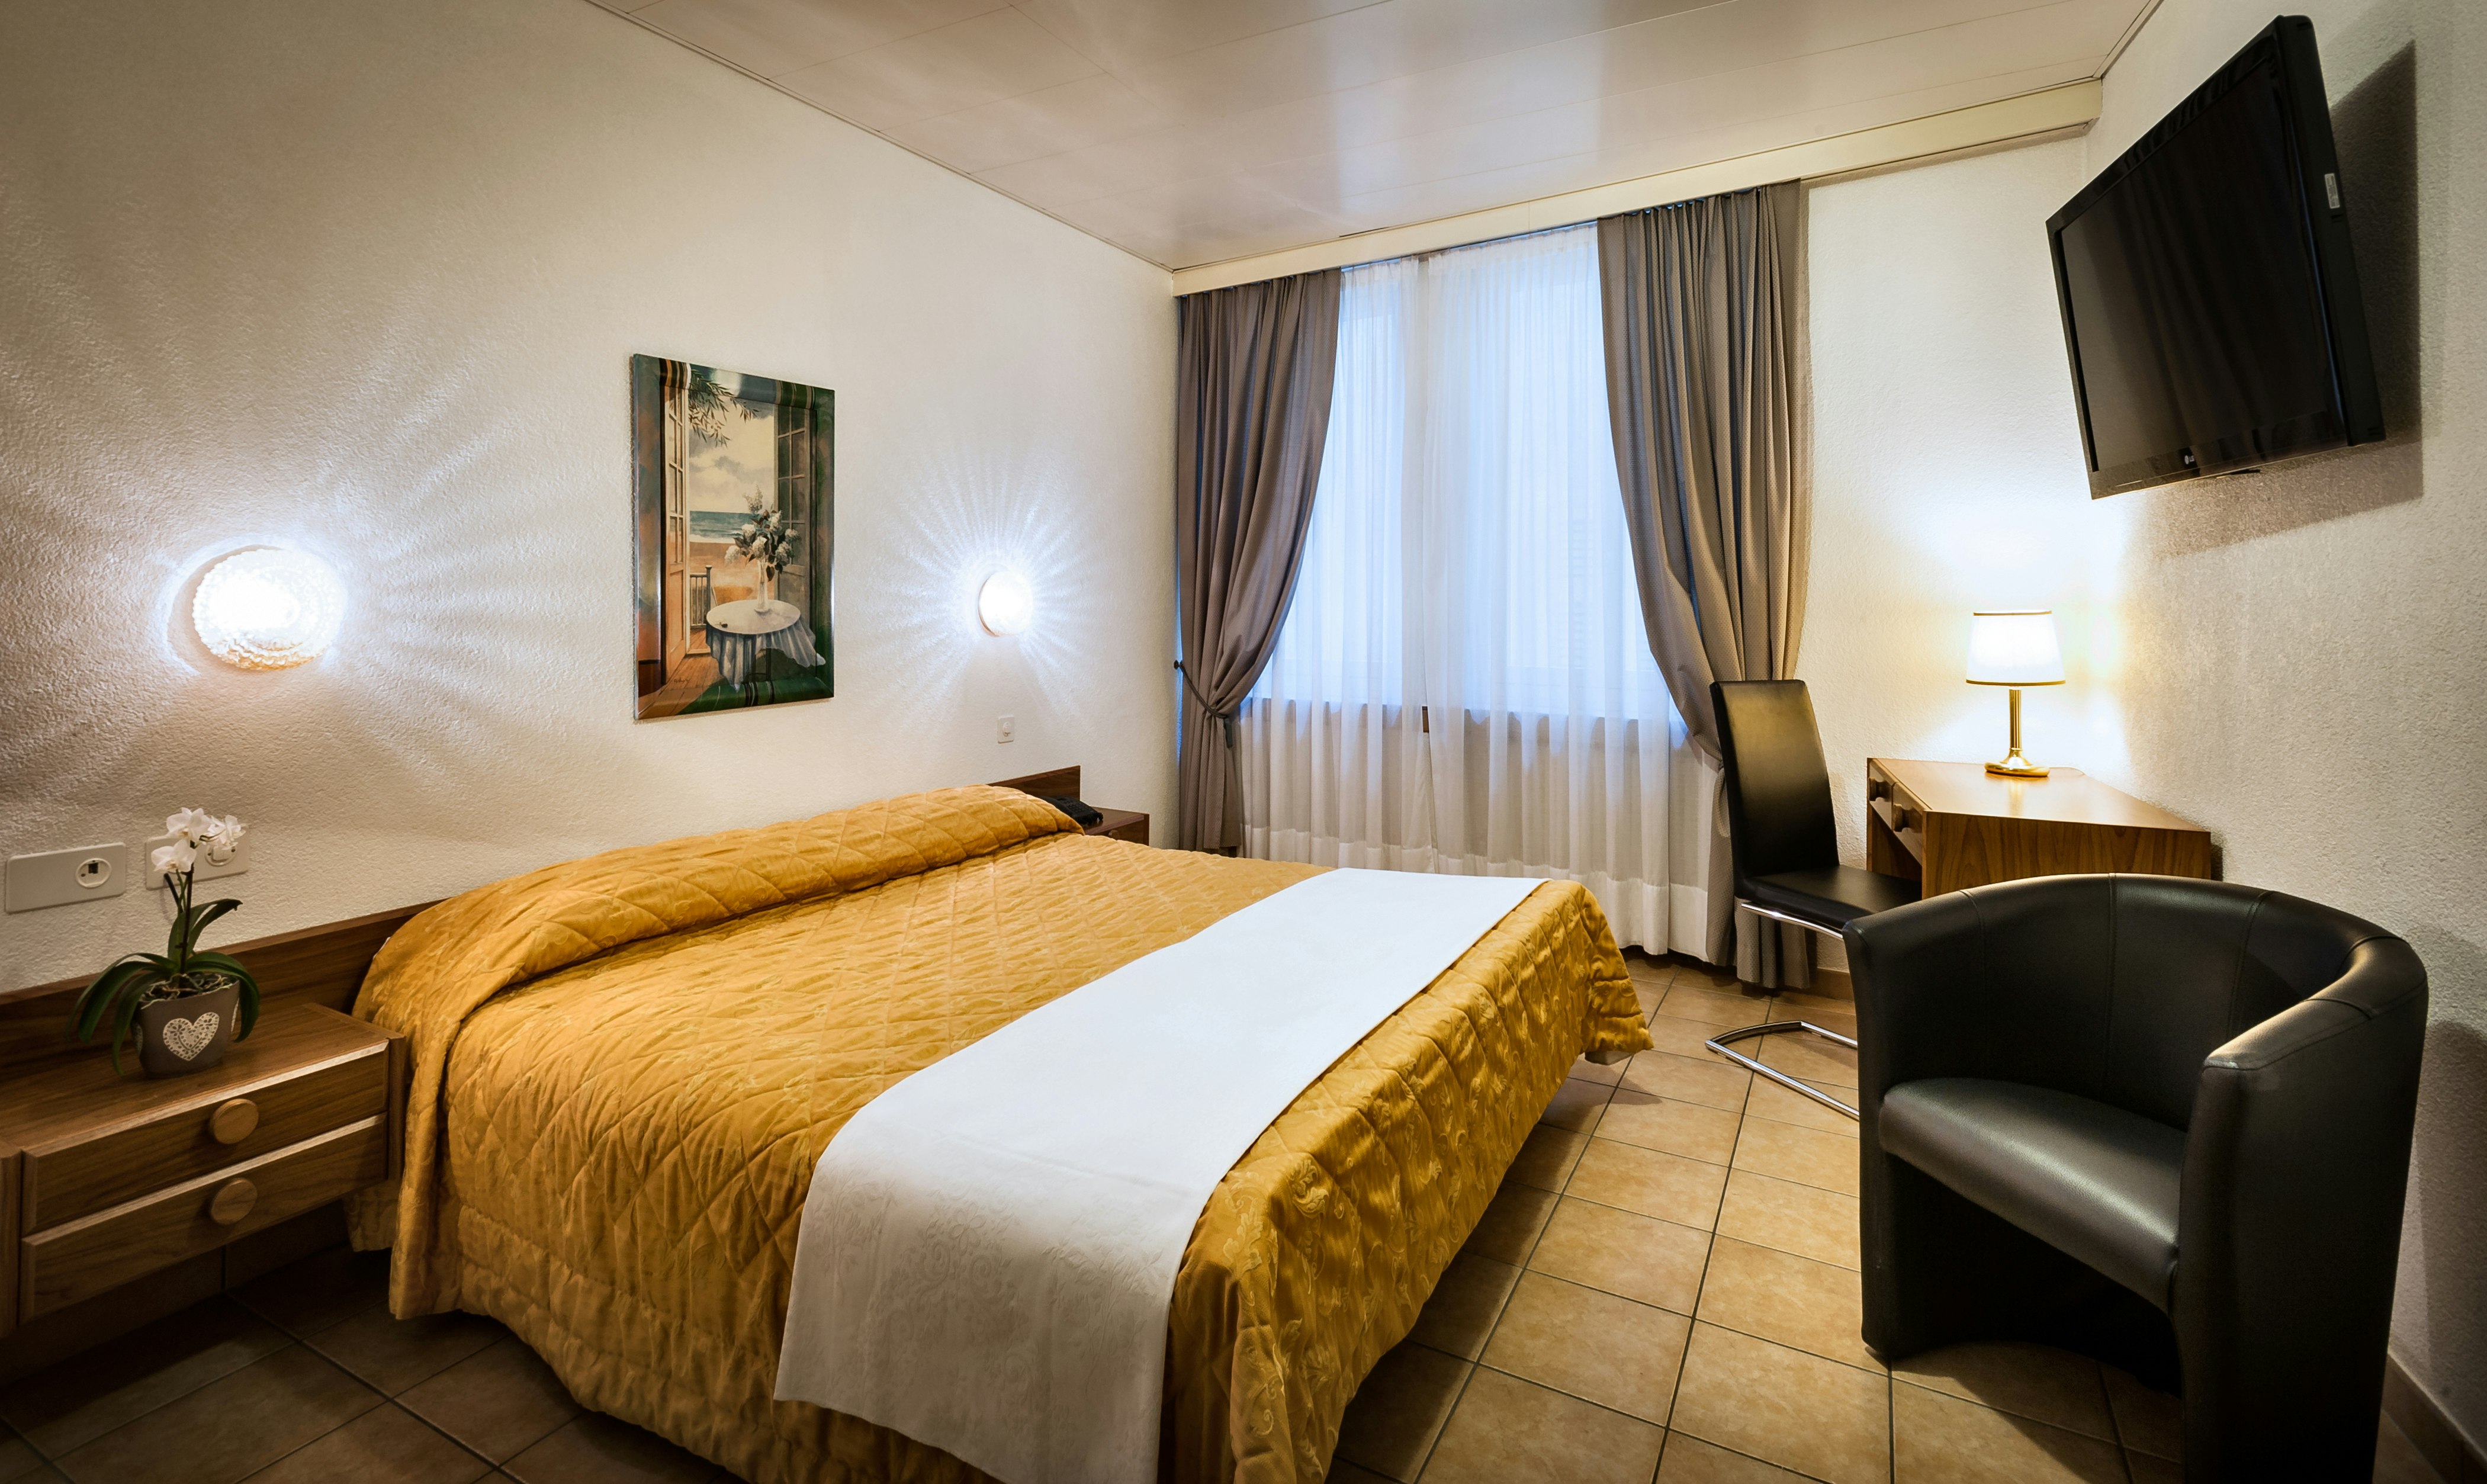 Overnight stay in Hotel Dell'Angelo